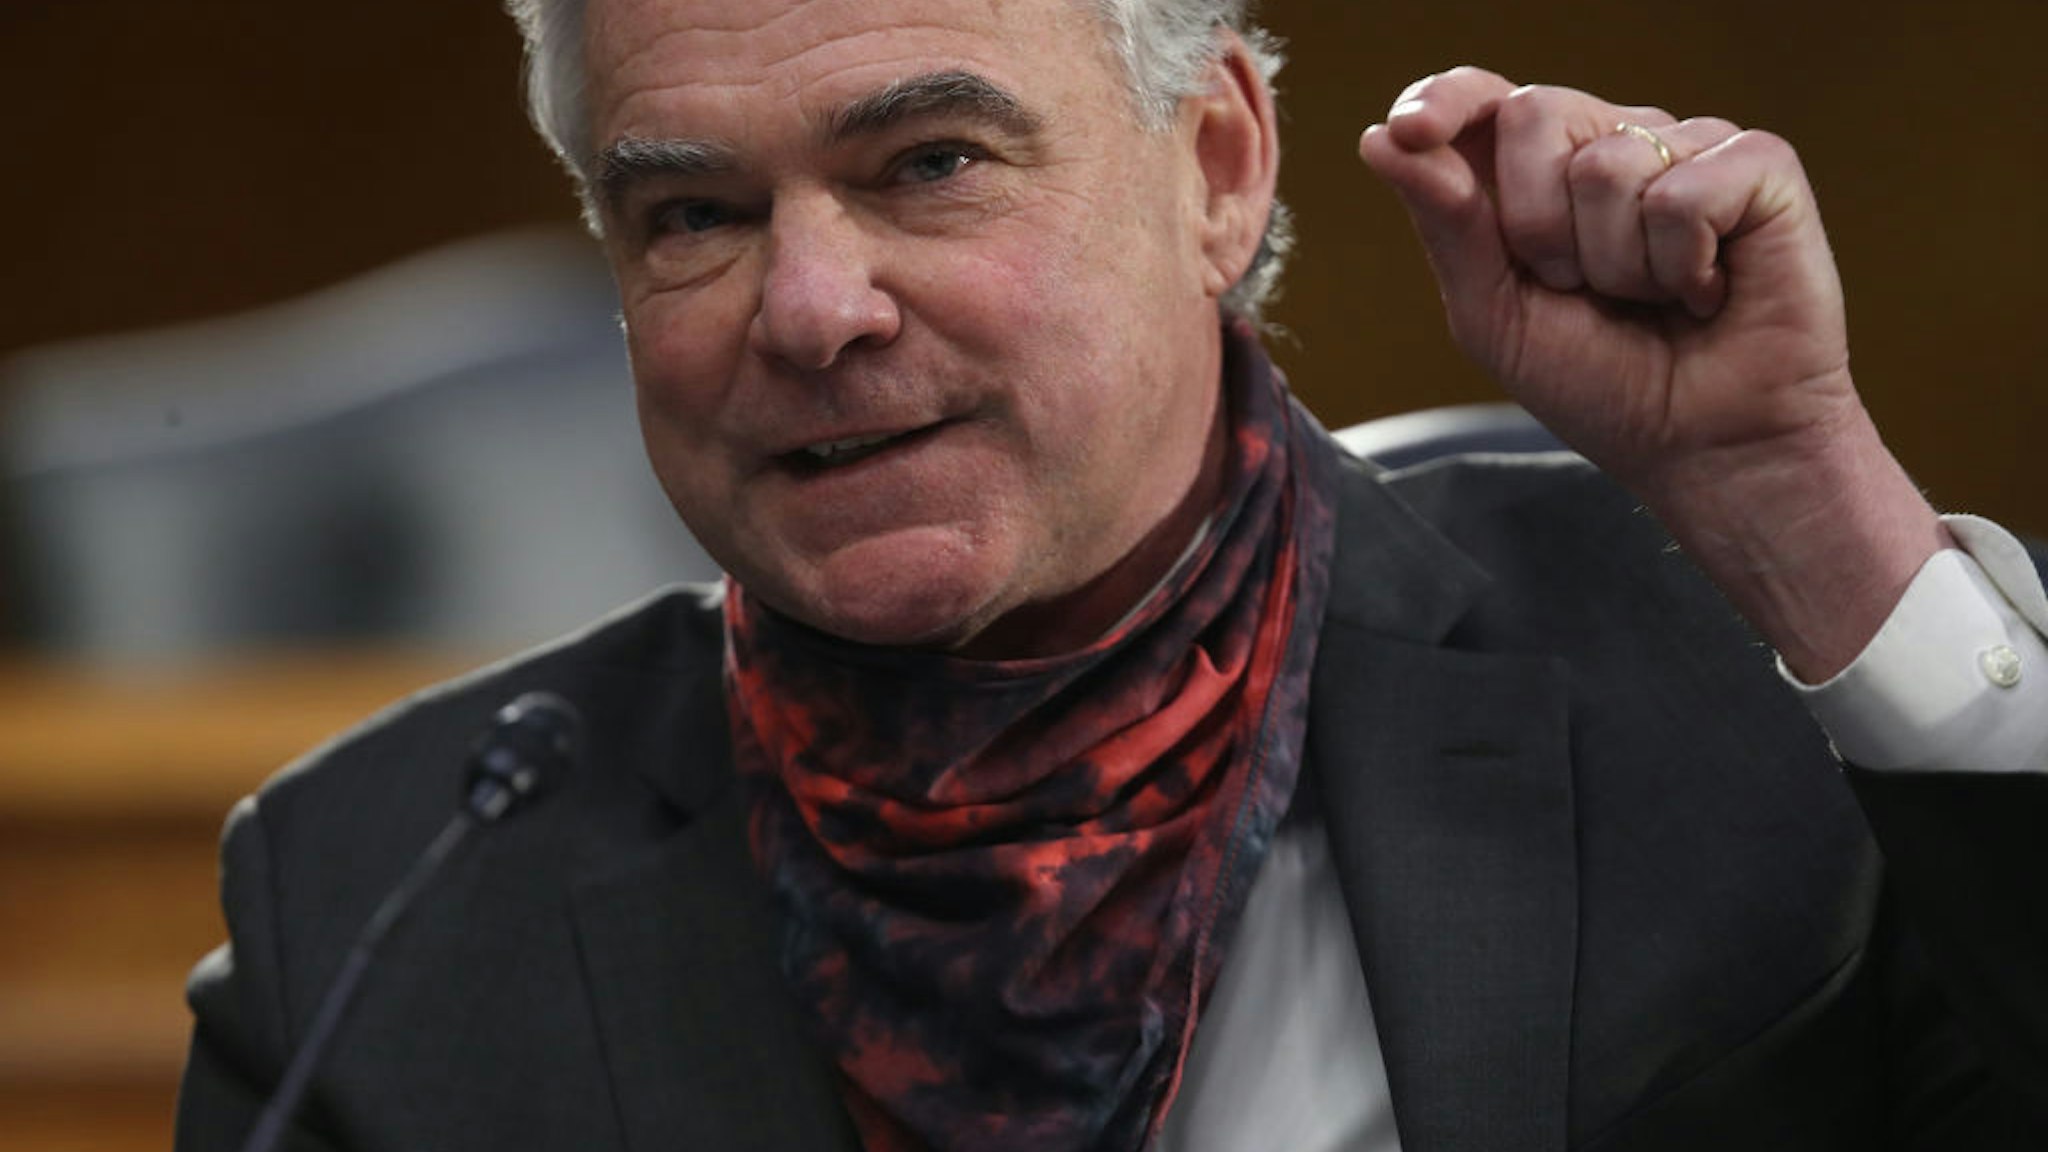 Sen. Tim Kaine (D-VA) asks questions during a Senate Health, Education, Labor and Pensions Committee hearing on Capitol Hill on May 12, 2020 in Washington, DC.